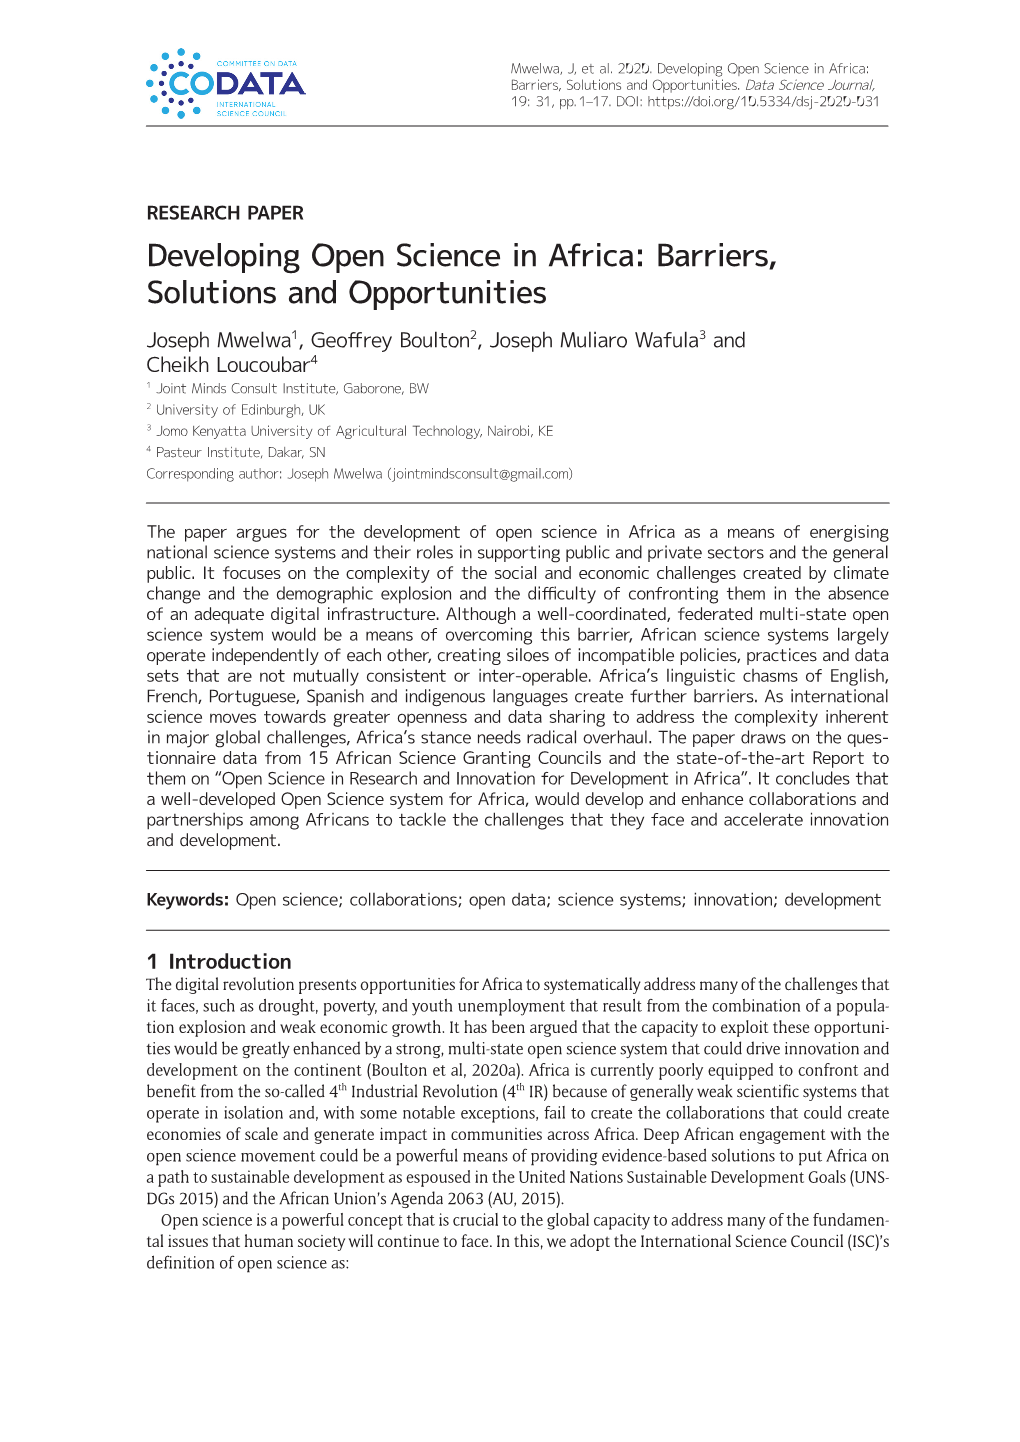 Developing Open Science in Africa: Barriers, Solutions and Opportunities